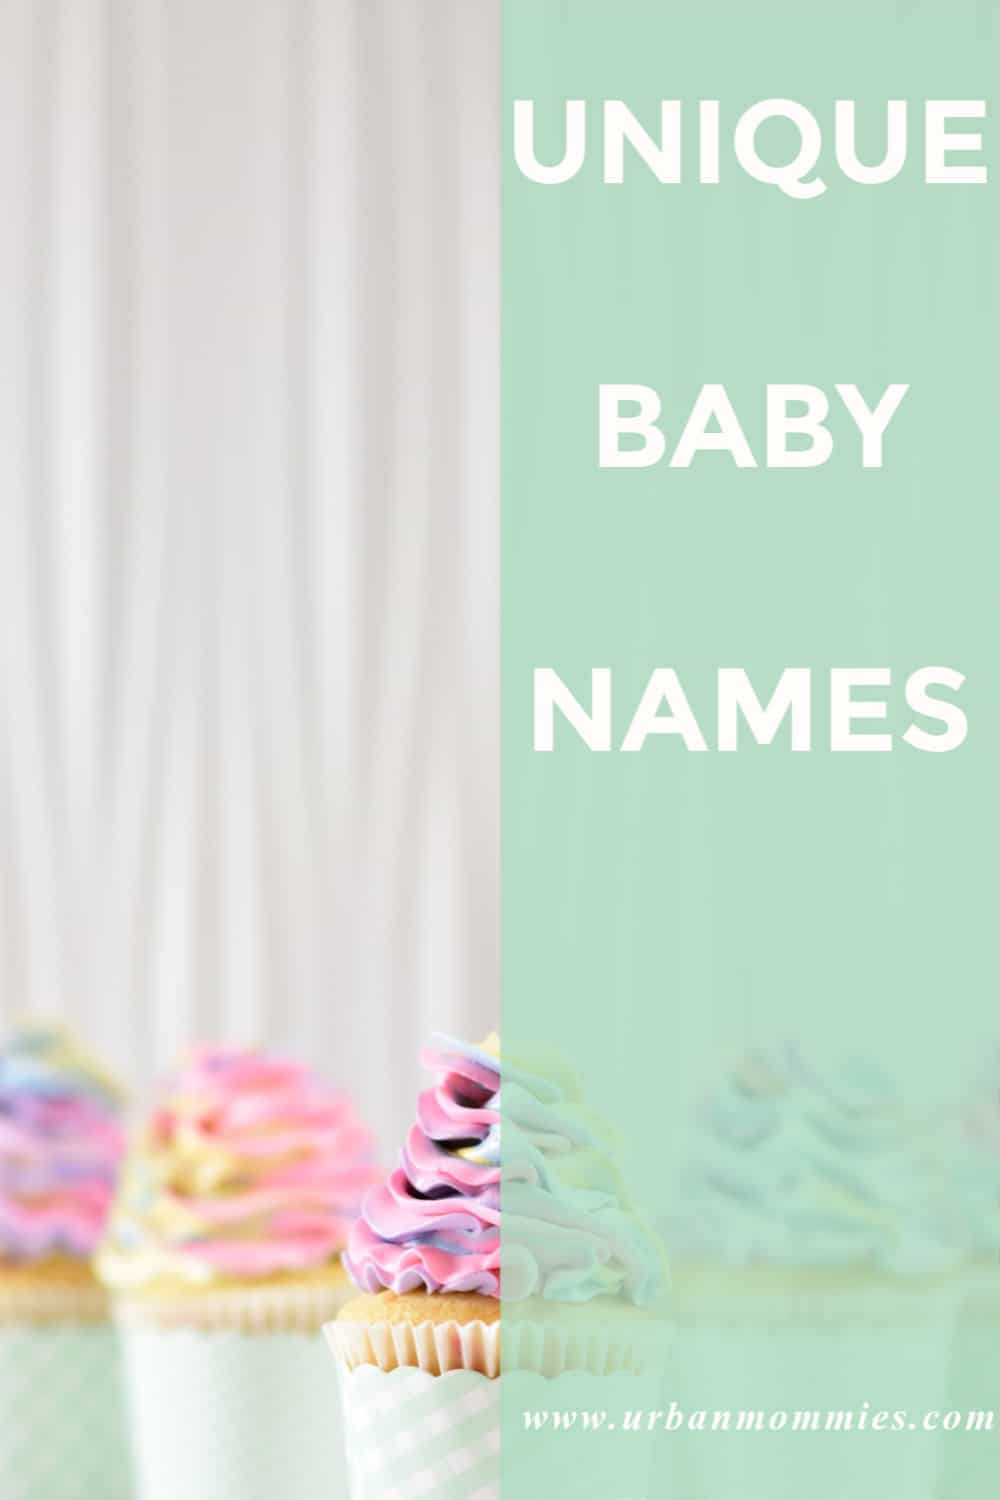 Baby Names that are Unique